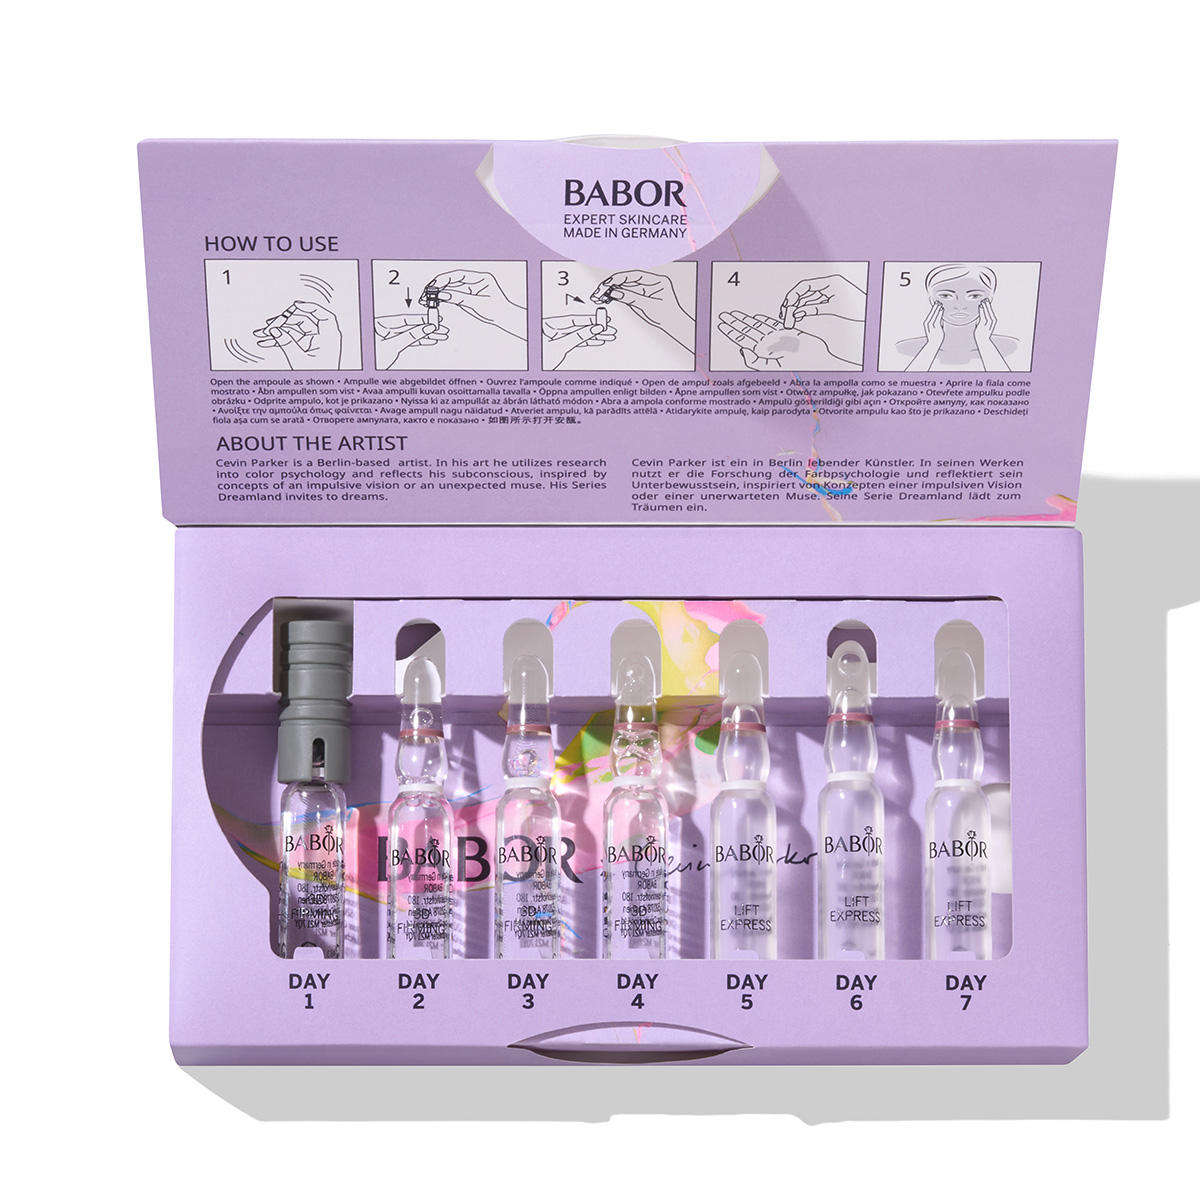 BABOR AMPOULE CONCENTRATES Lifting Ampoule Limited Edition 7 x 2 ml - 3